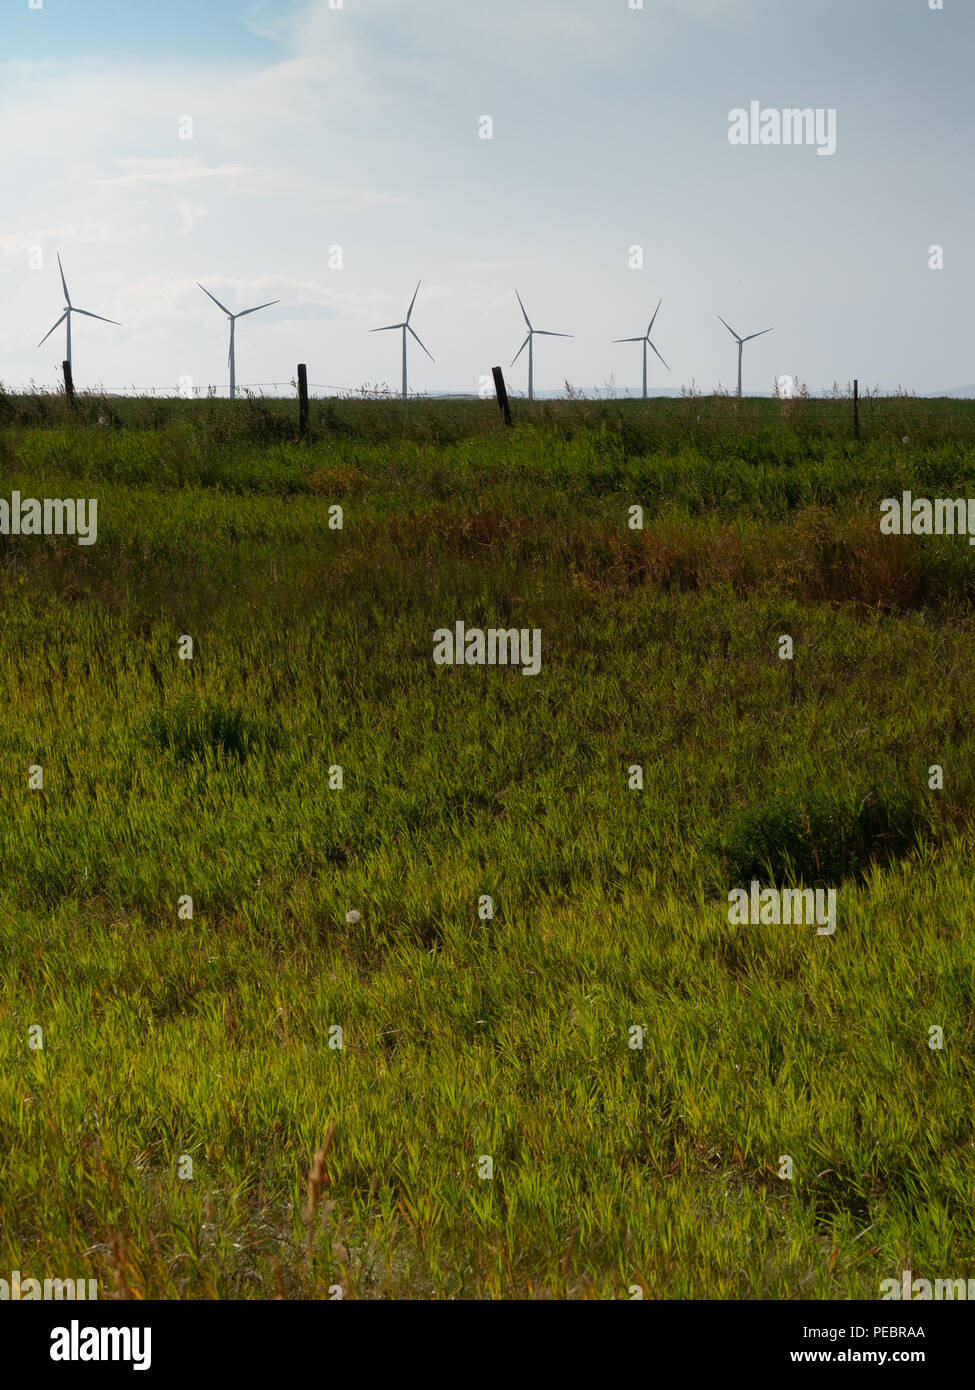 Six windmills on the crest of a hill with a lush, grassy meadow in the foreground and blue sky with cirrus clouds overhead. Stock Photo